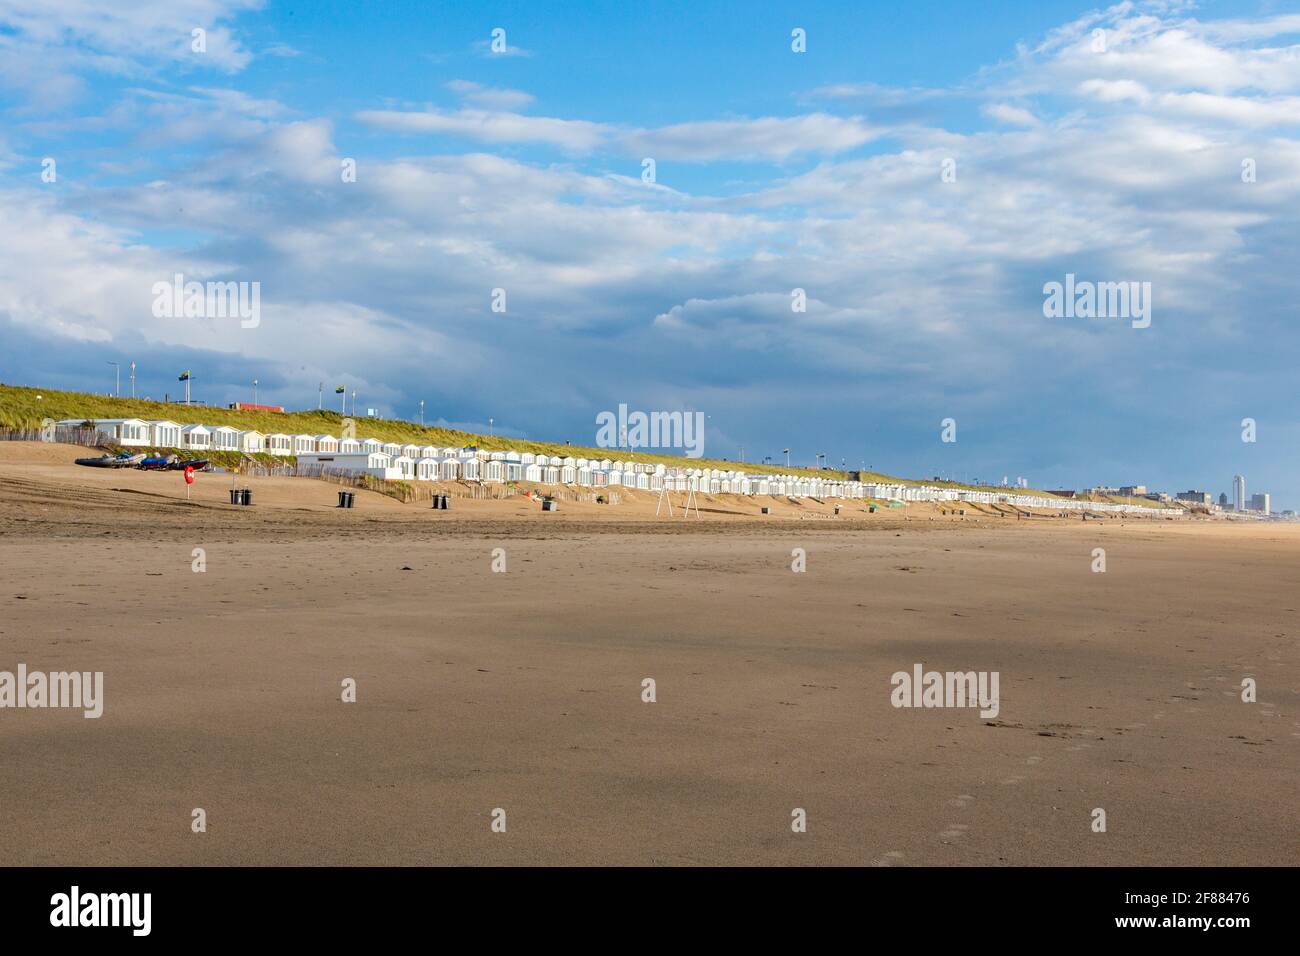 White beachhouses at the deserted and wide beach of Bloemendaal aan Zee, Netherlands. On a cloudy day. Stock Photo